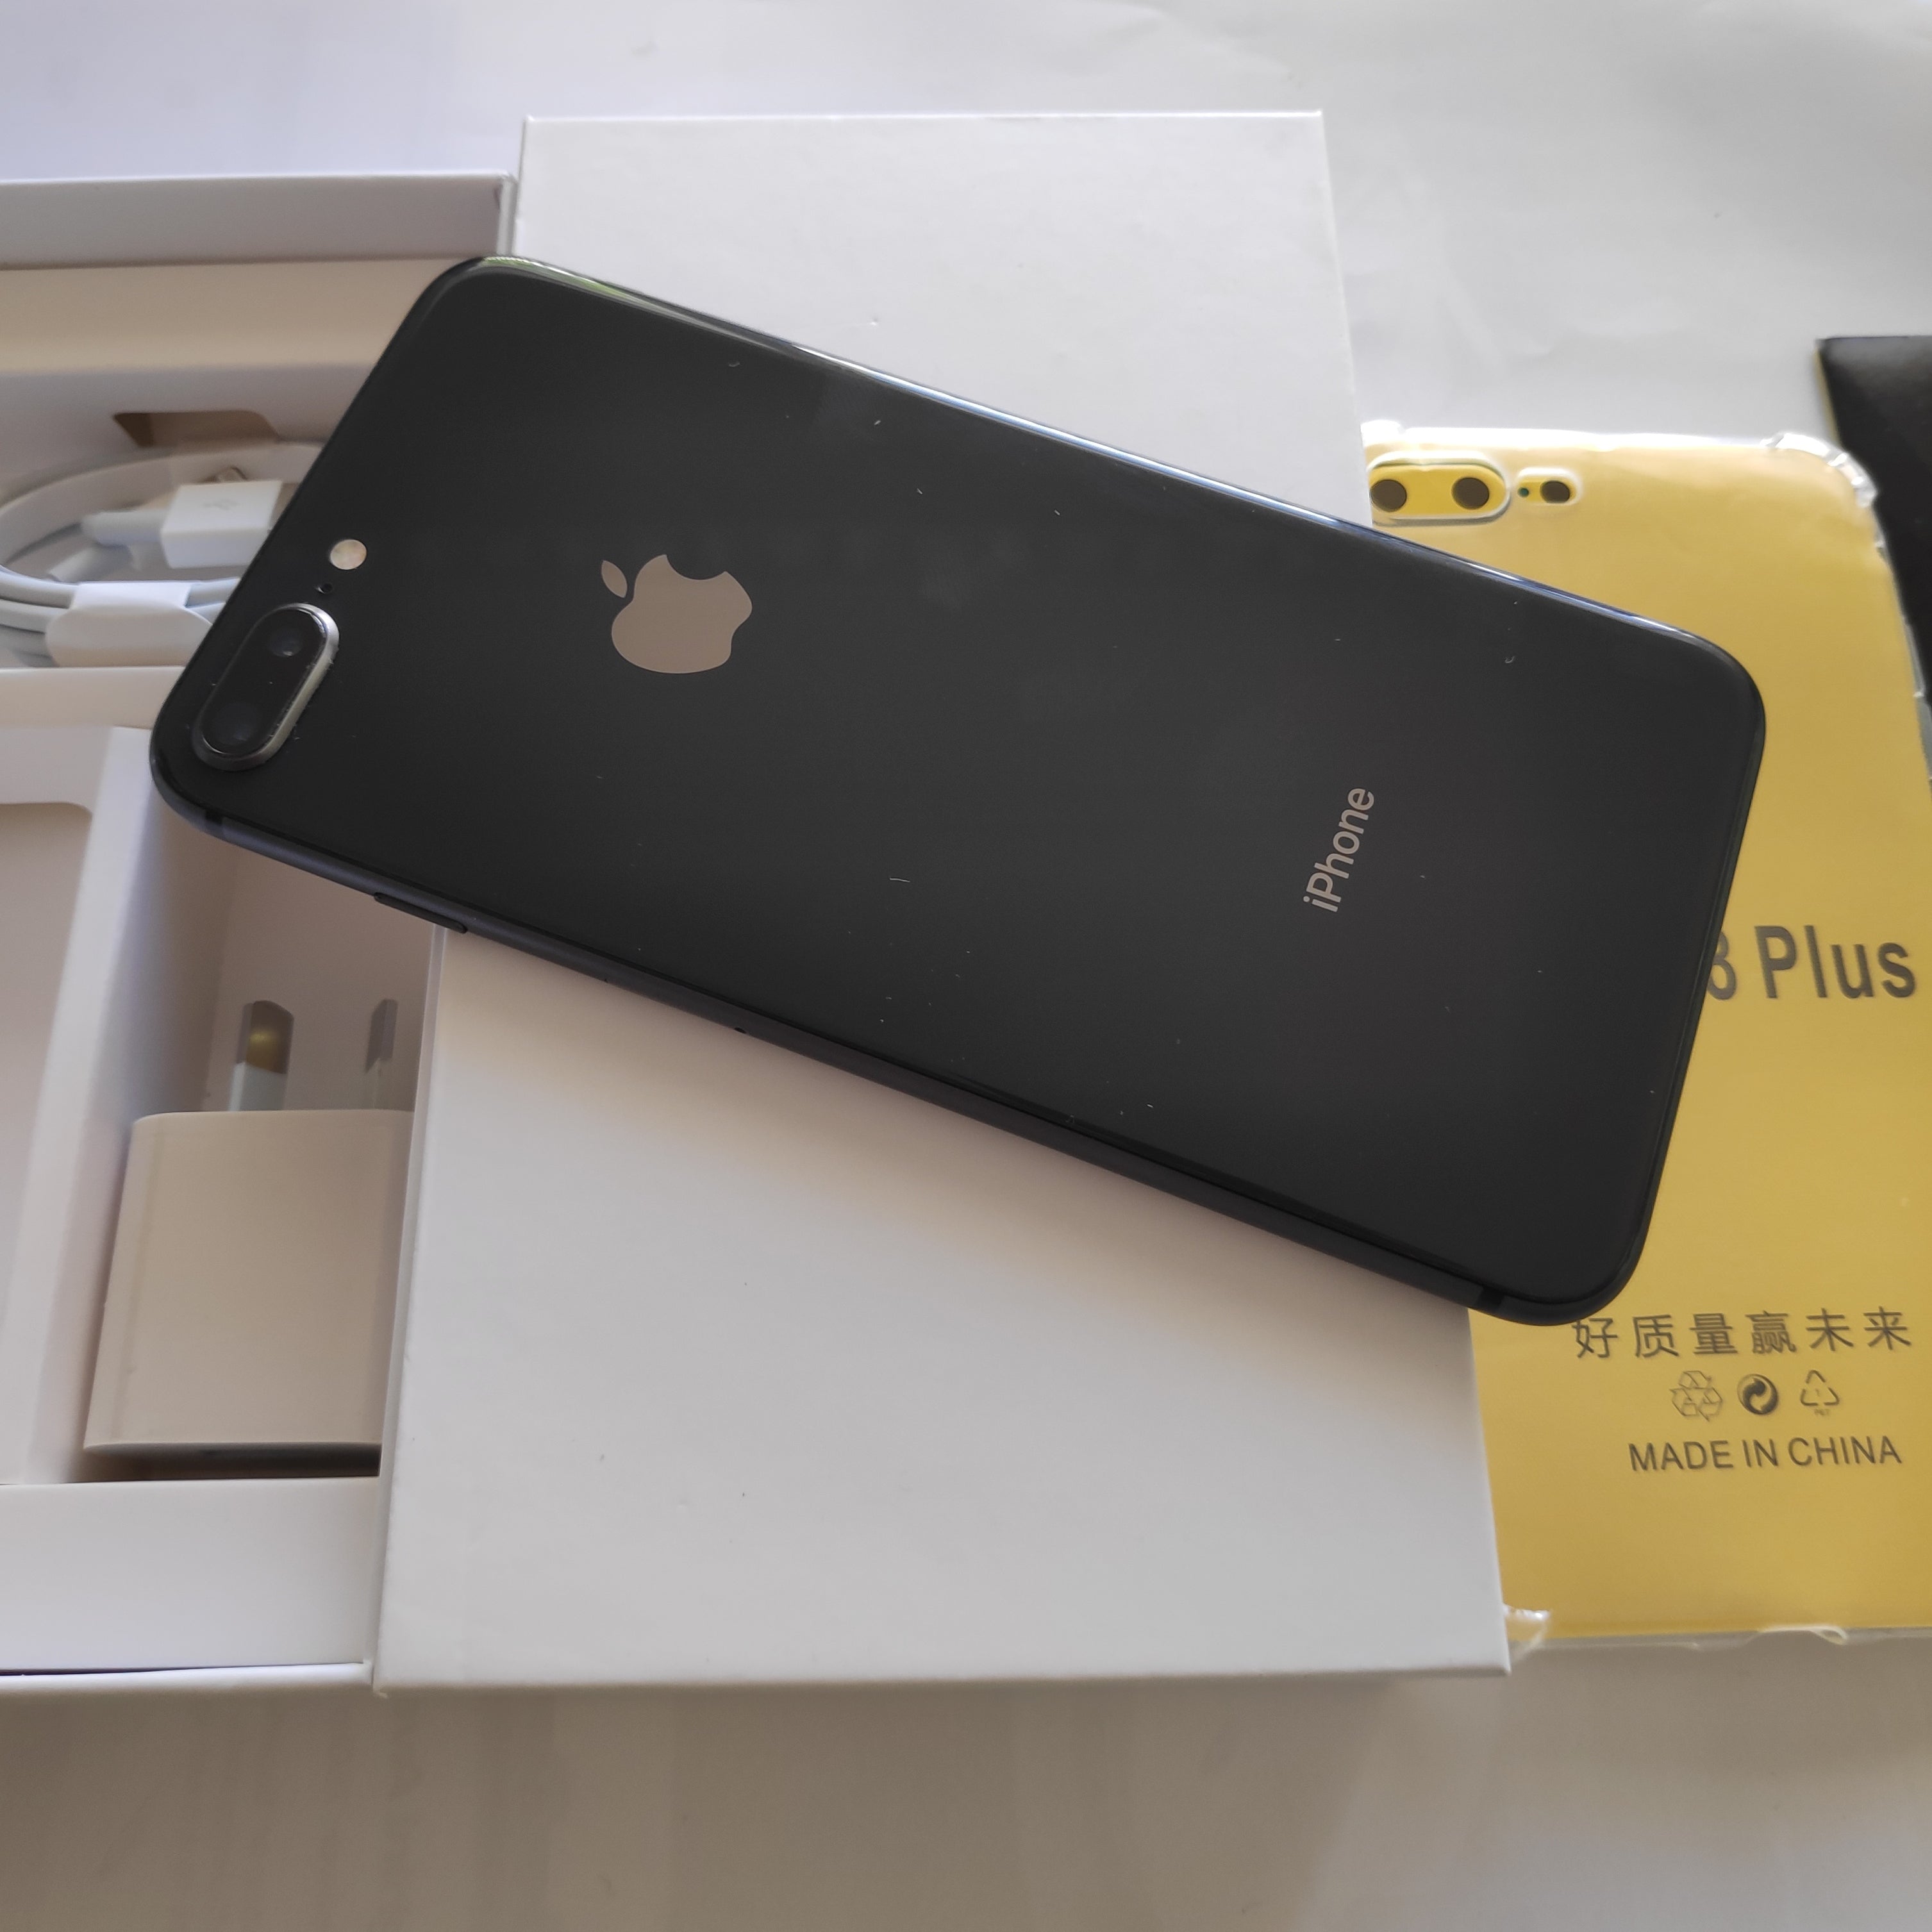 Apple iPhone 8 Plus 64GB Space Grey New Case, Screen Protector & Shipping (As New)